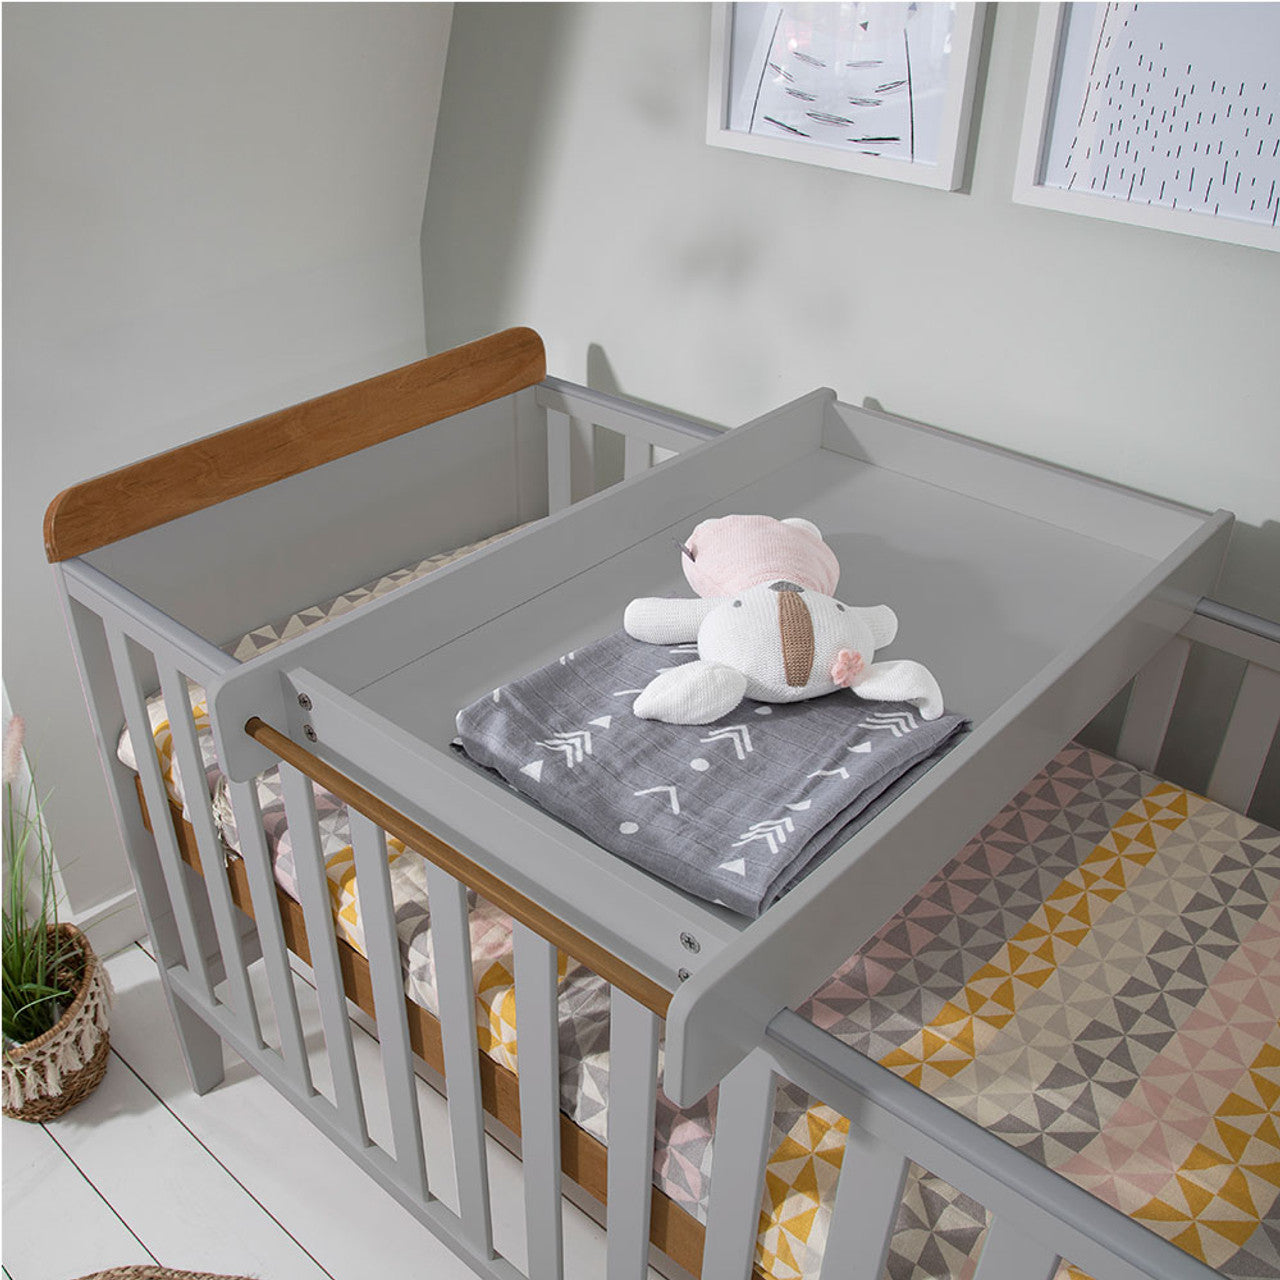 Tutti Bambini Rio Cot Bed with Cot Top Changer & Mattress - Grey/Oak -  | For Your Little One